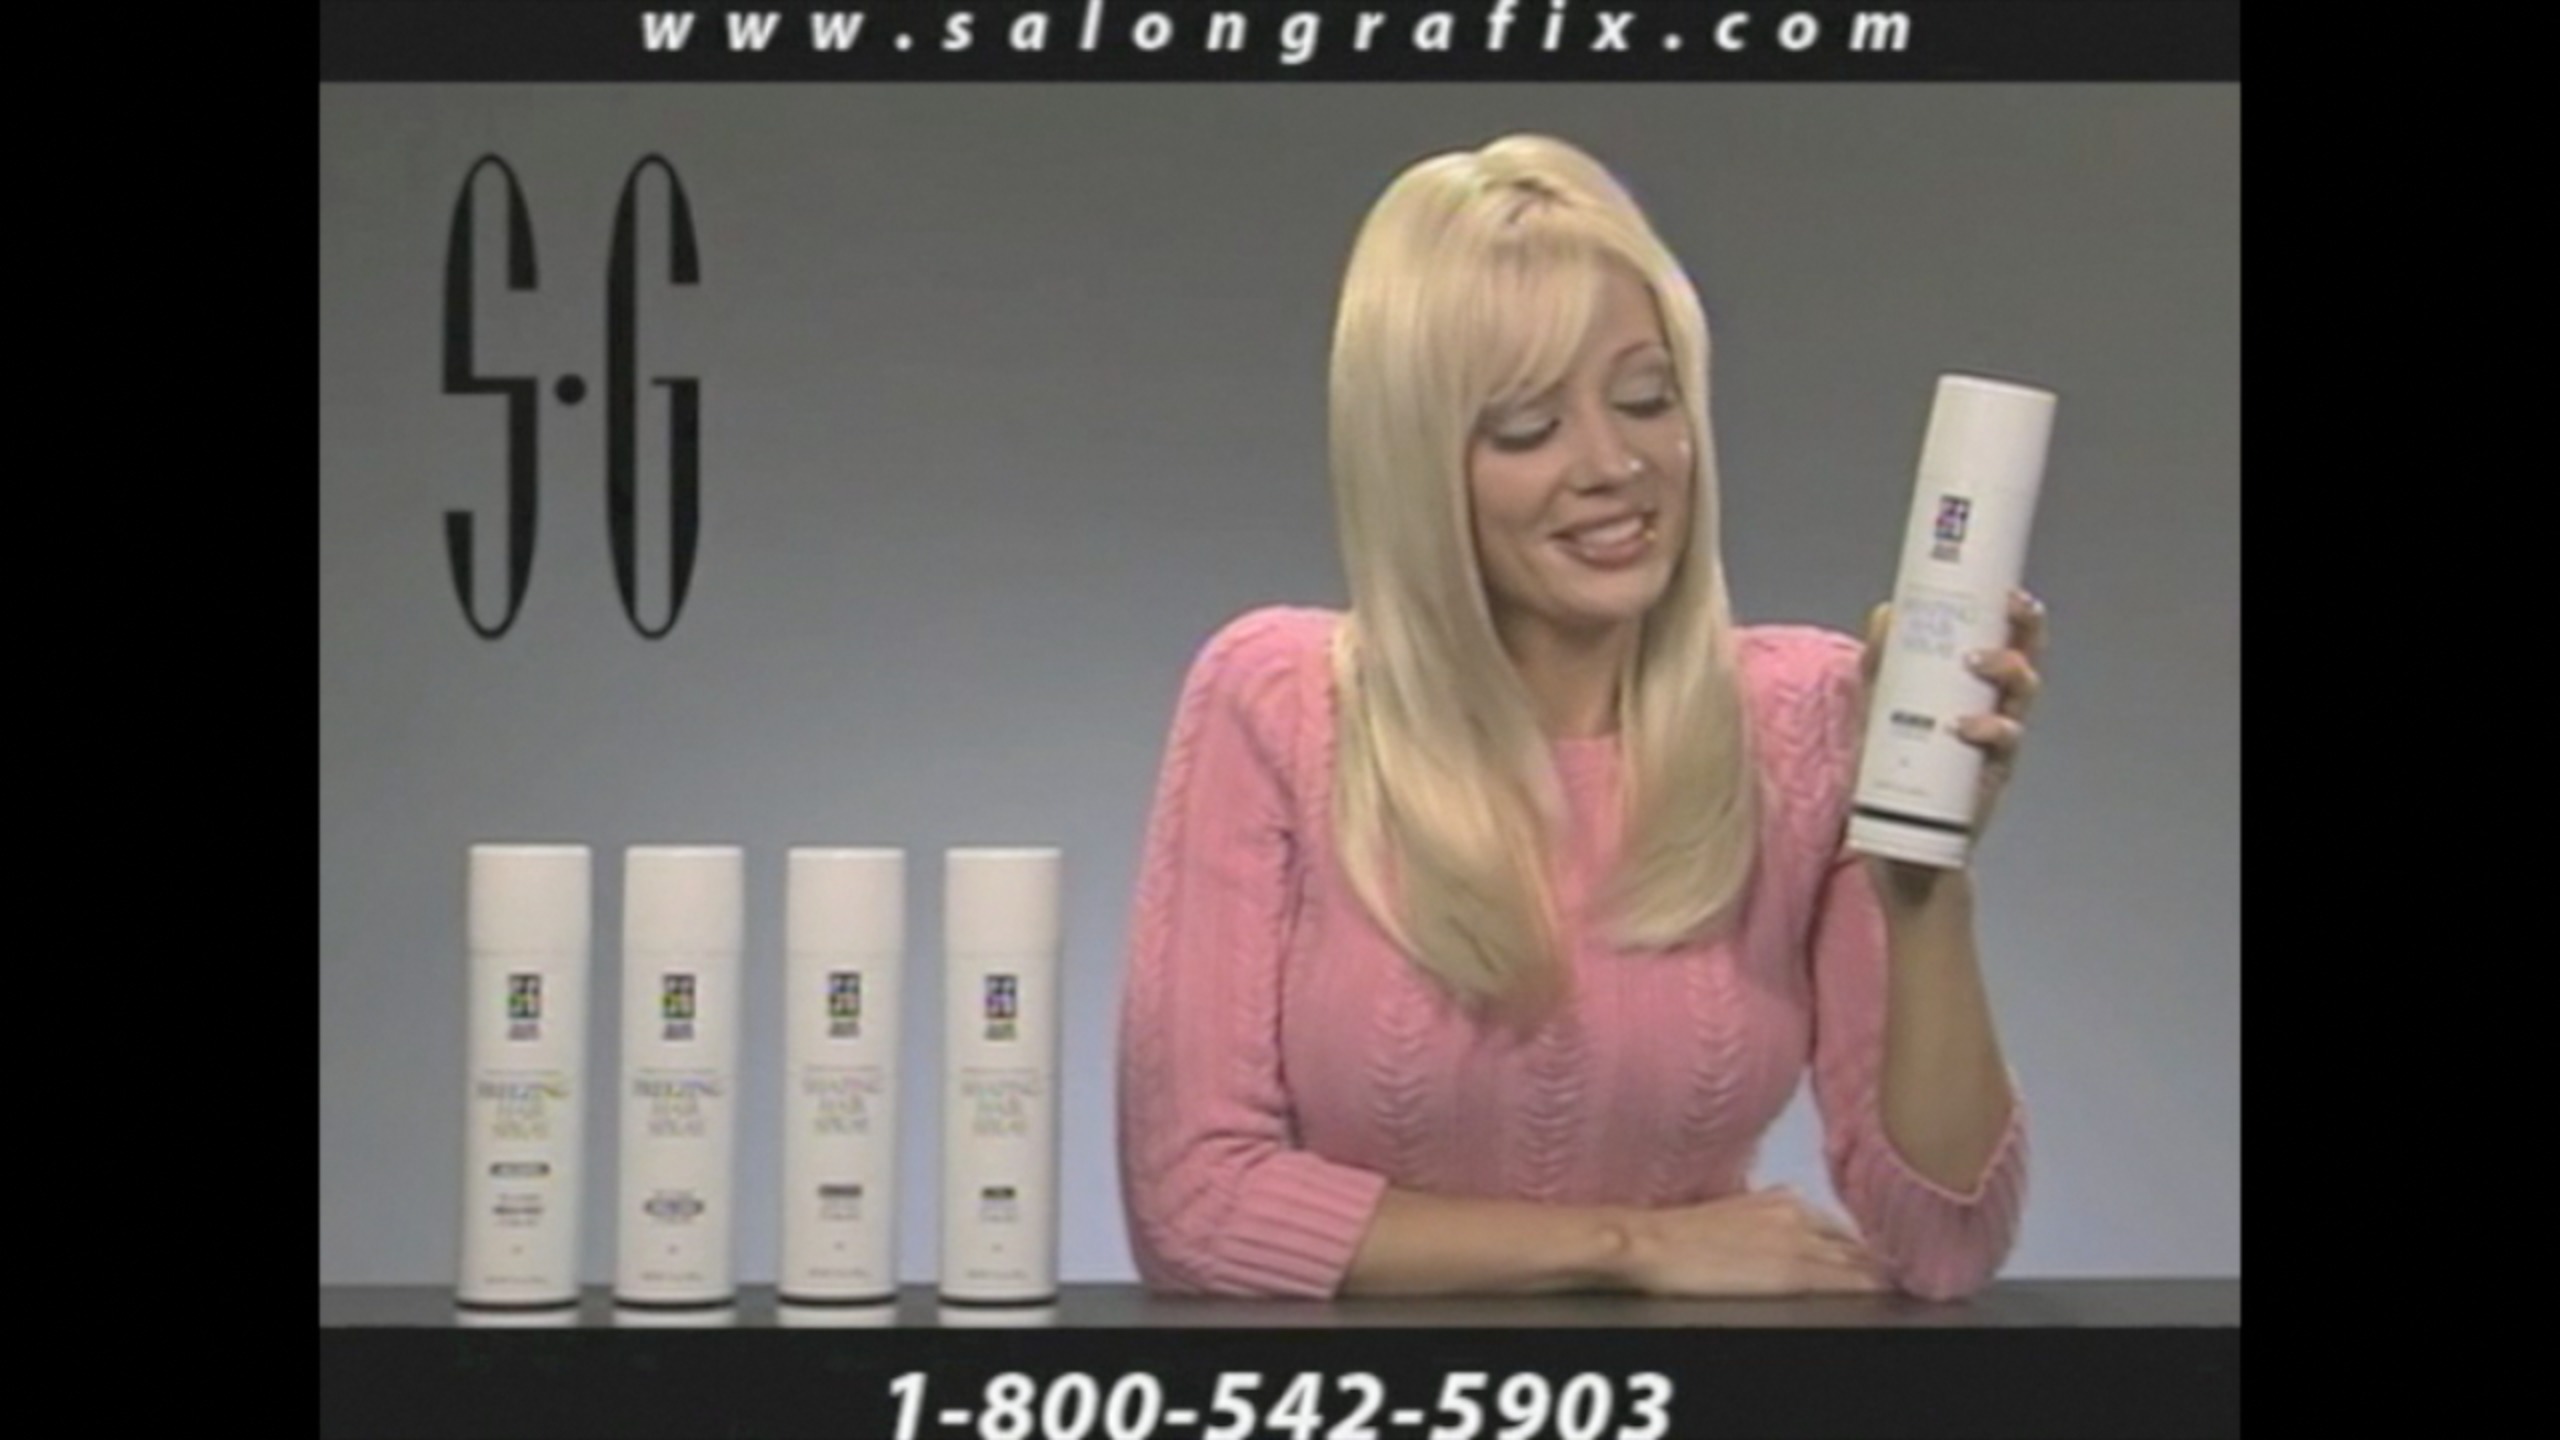 Screen Grab of Stacey Hayes from SALON GRAFFIX commercial